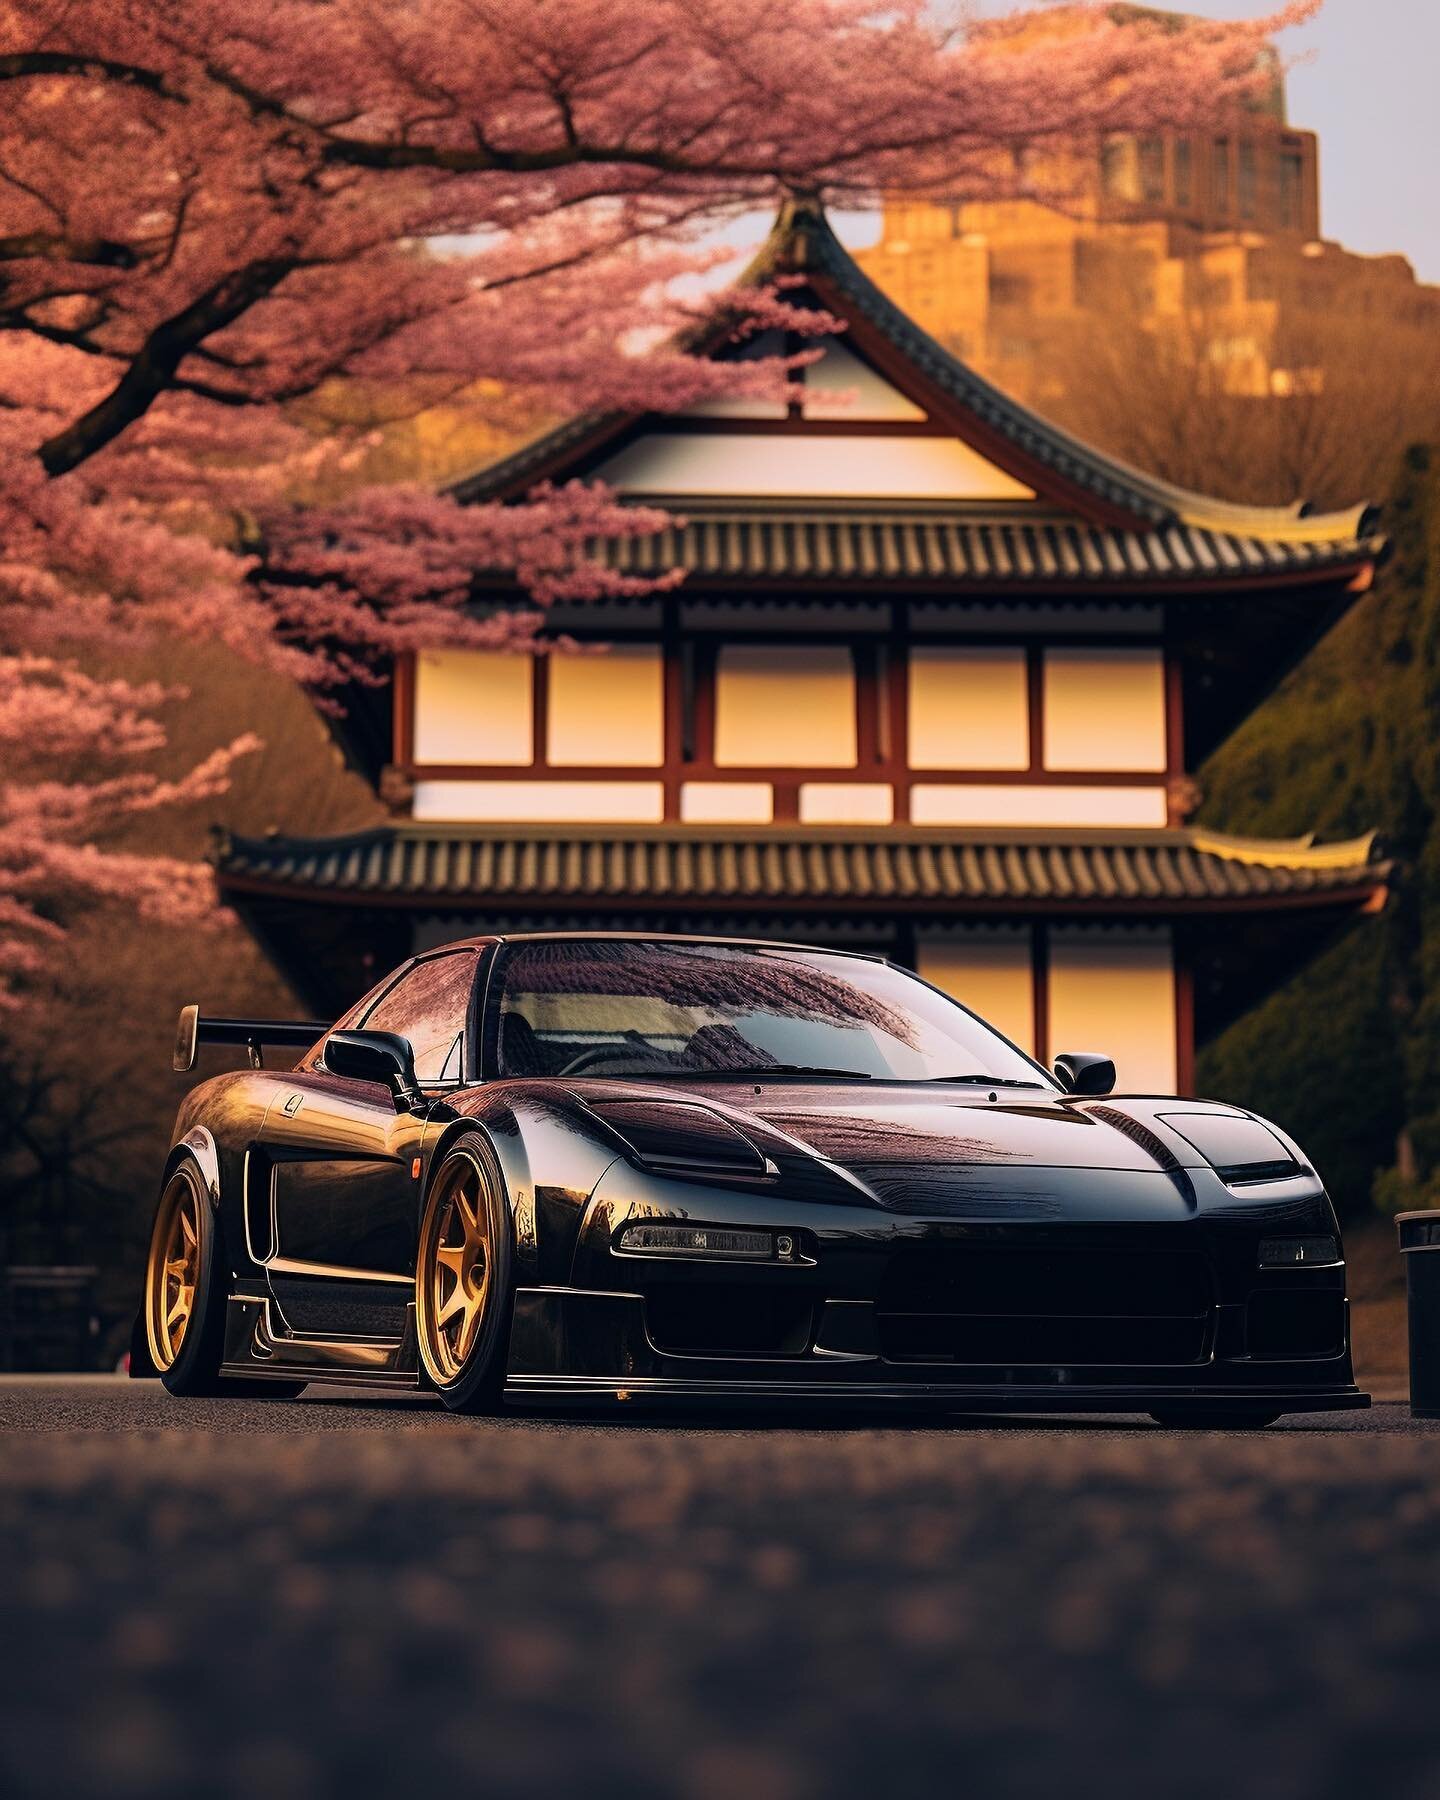 Took some new steps to build a more complete picture. More real, more life, more resolution. Using #Ai to create, using Ai to enhance. Enjoy this #NSX in #Japan 🇯🇵 with some custom modifications. #midjourney #gigapixel